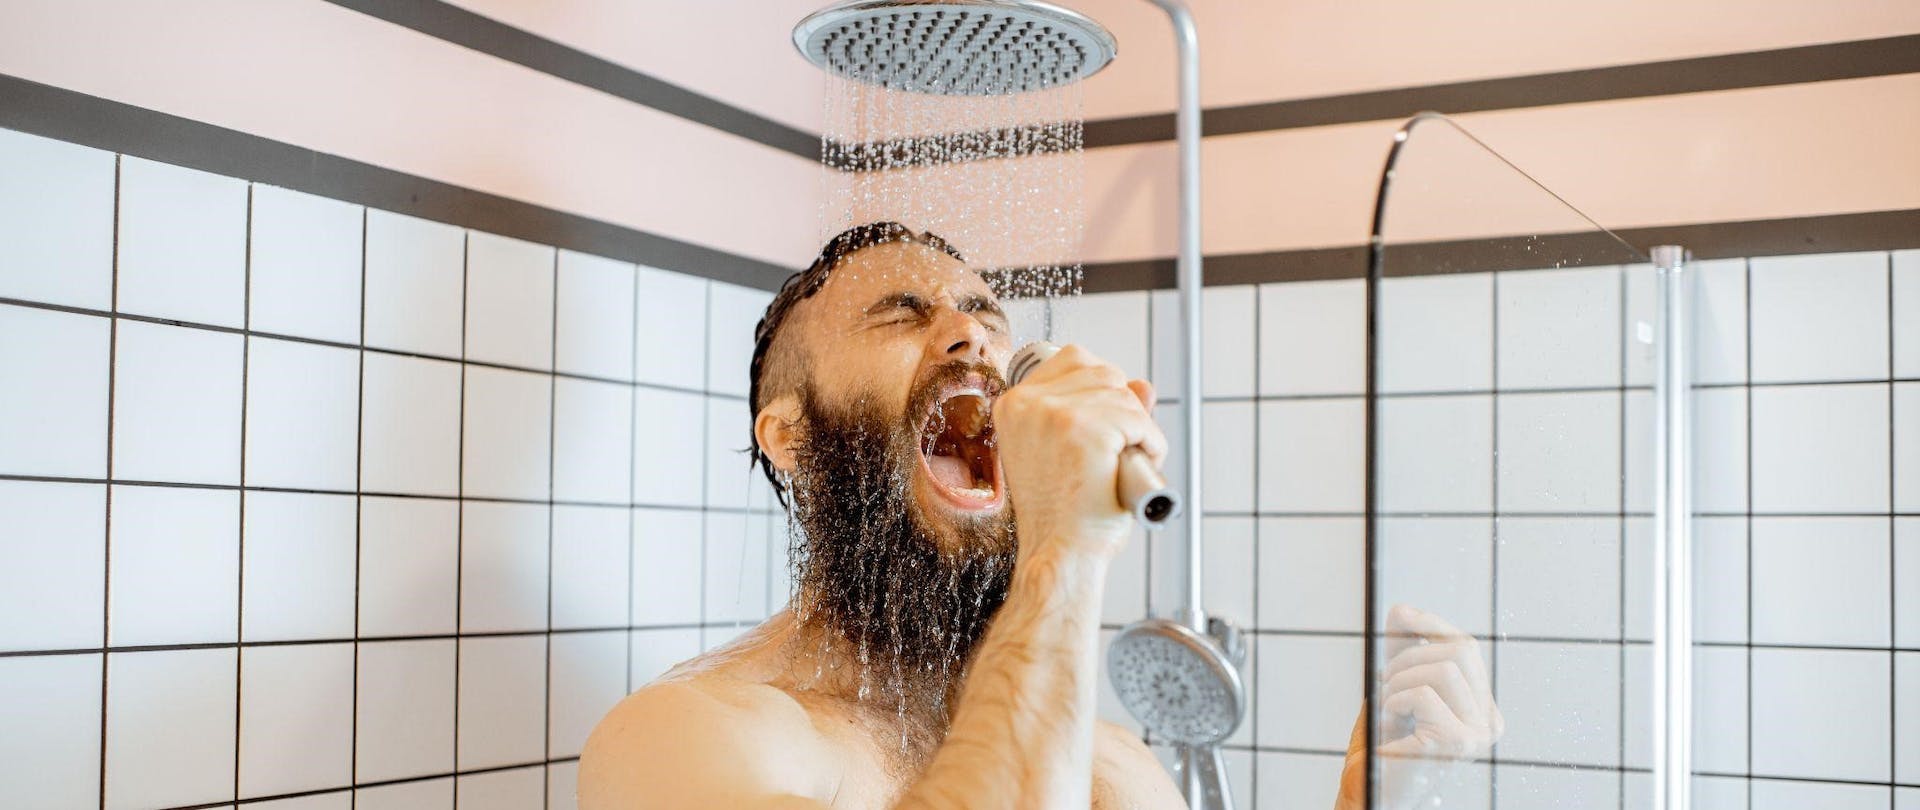 HARD WATER VS. SOFT WATER MAN IN SHOWER FUNNY PHOTO